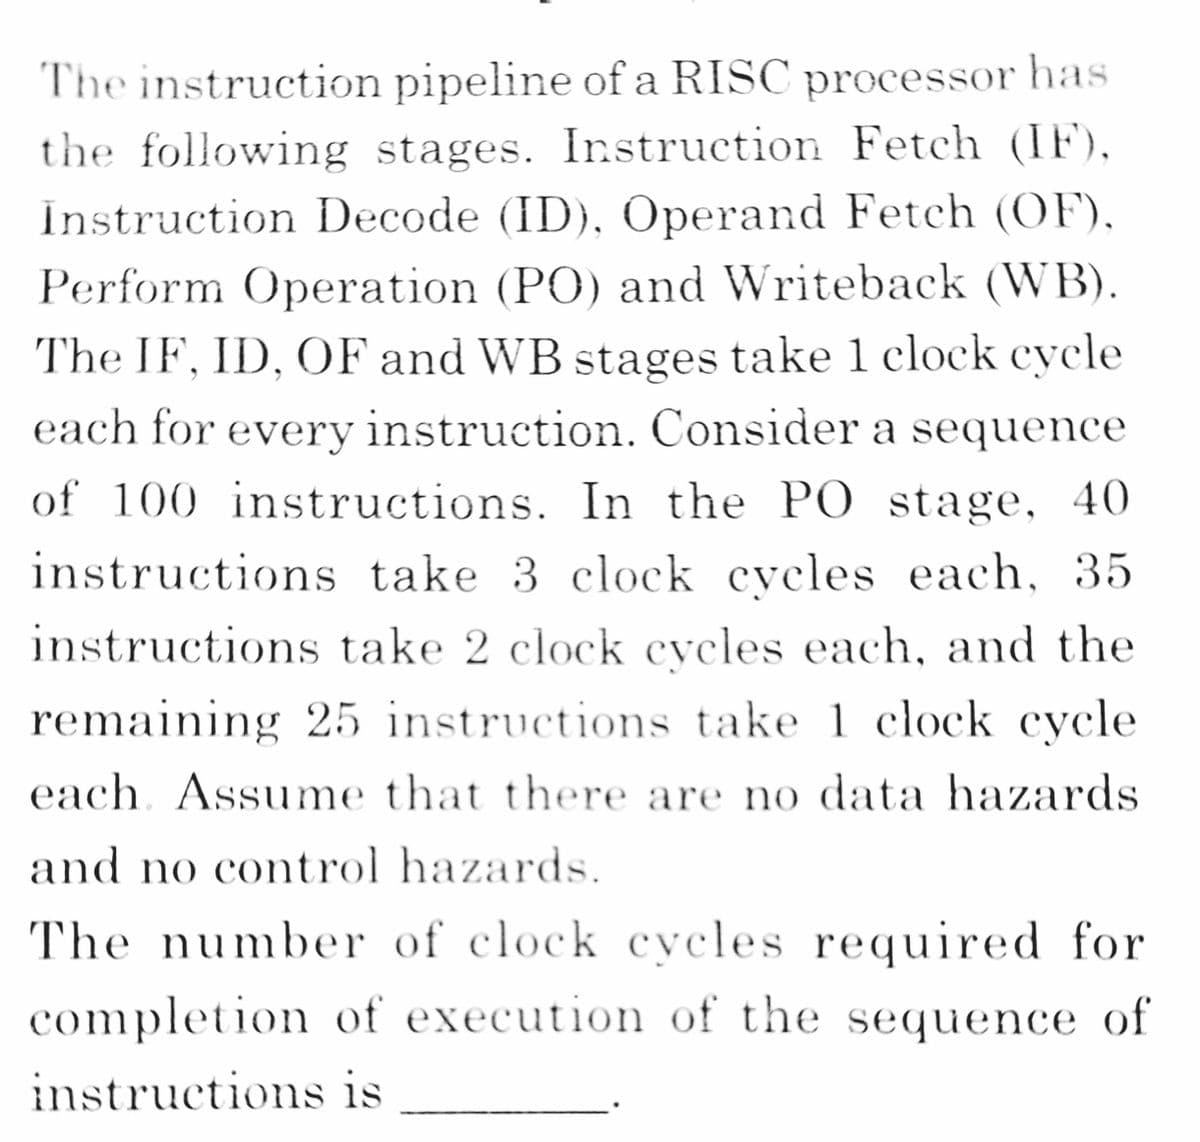 The instruction pipeline of a RISC processor has
the following stages. Instruction Fetch (IF),
Instruction Decode (ID), Operand Fetch (OF),
Perform Operation (PO) and Writeback (WB).
The IF, ID, OF and WB stages take 1 clock cycle
each for every instruction. Consider a sequence
of 100 instructions. In the PO stage, 40
instructions take 3 clock eveles each, 35
instructions take 2 clock cycles each, and the
remaining 25 instructions take 1 clock cycle
each. Assume that there are no data hazards
and no control hazards.
The number of clock cycles required for
completion of execution of the sequence of
instructions is
